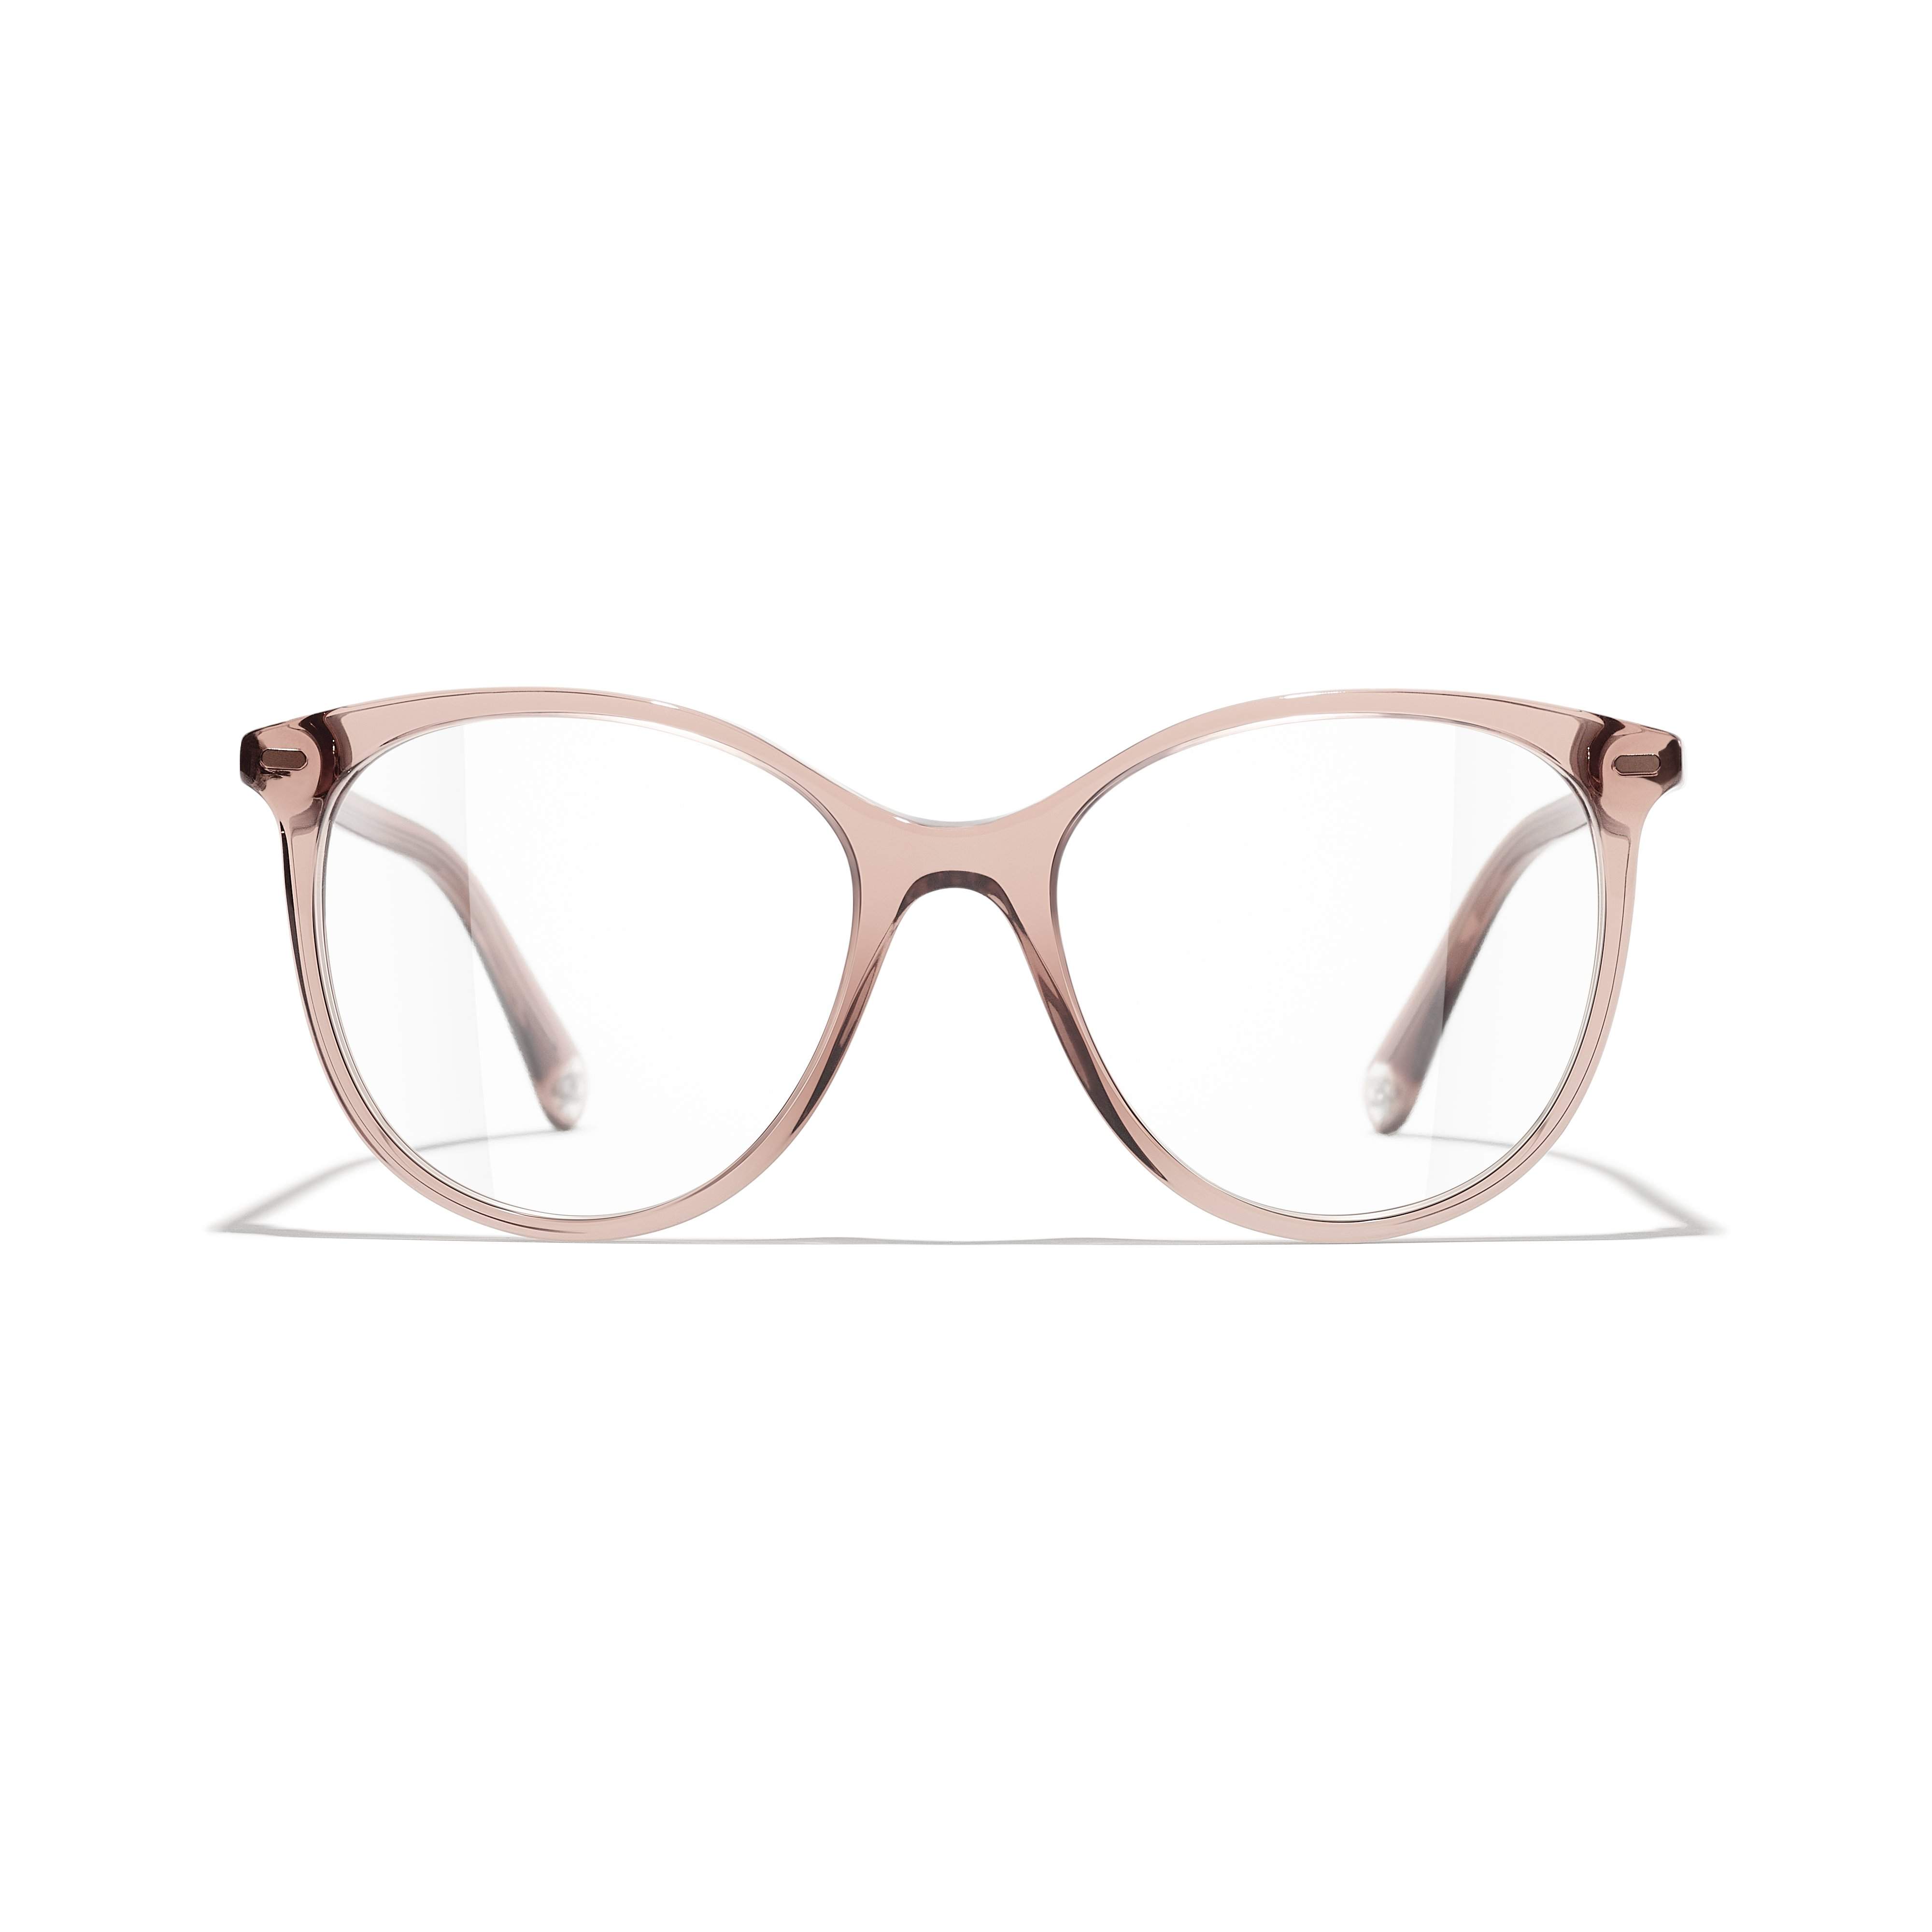 Eyeglasses CHANEL Signature CH3412 1709 51-17 Brown transparent in stock, Price 187,50 €